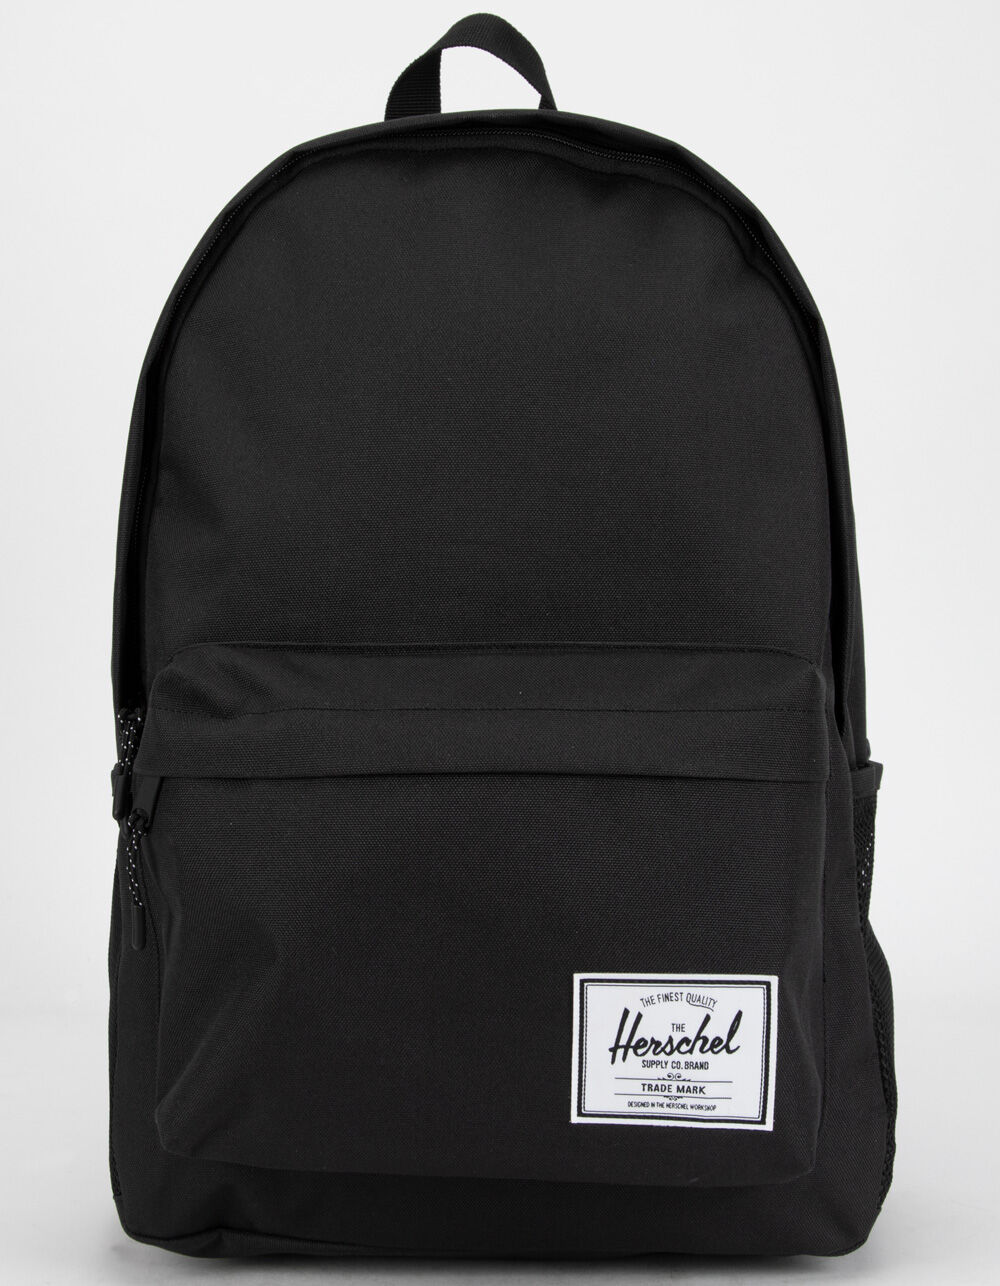 Herschel Laptop Sleeves and Bags Review 